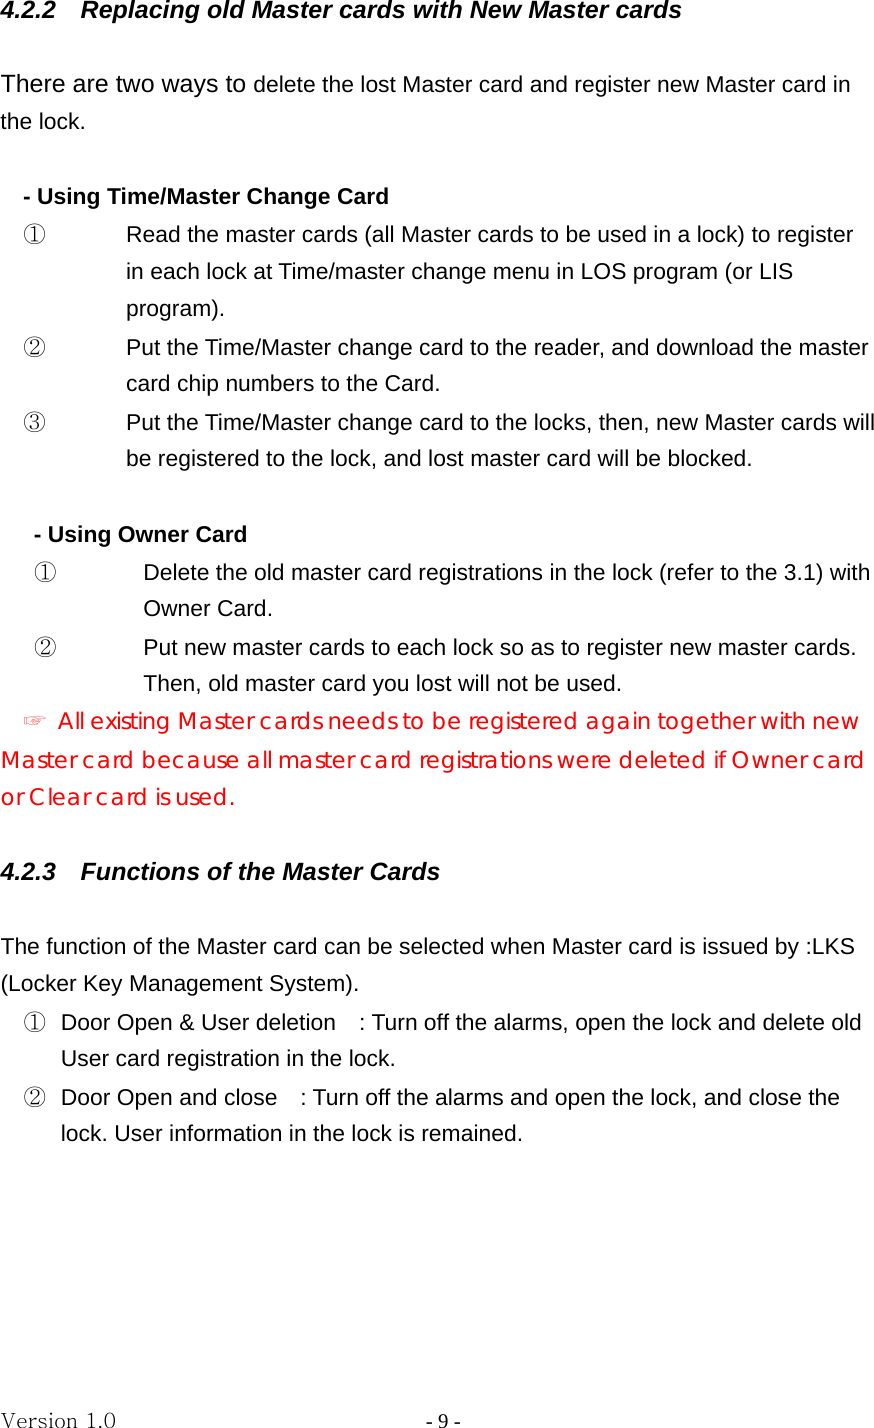 Version 1.0                - 9 - 4.2.2  Replacing old Master cards with New Master cards  There are two ways to delete the lost Master card and register new Master card in the lock.  - Using Time/Master Change Card ①  Read the master cards (all Master cards to be used in a lock) to register in each lock at Time/master change menu in LOS program (or LIS program). ②  Put the Time/Master change card to the reader, and download the master card chip numbers to the Card.   ③  Put the Time/Master change card to the locks, then, new Master cards will be registered to the lock, and lost master card will be blocked.    - Using Owner Card   ①  Delete the old master card registrations in the lock (refer to the 3.1) with Owner Card. ②  Put new master cards to each lock so as to register new master cards. Then, old master card you lost will not be used. ☞  All existing Master cards needs to be registered again together with new Master card because all master card registrations were deleted if Owner card or Clear card is used.  4.2.3    Functions of the Master Cards  The function of the Master card can be selected when Master card is issued by :LKS (Locker Key Management System).   ①  Door Open &amp; User deletion    : Turn off the alarms, open the lock and delete old User card registration in the lock. ②  Door Open and close    : Turn off the alarms and open the lock, and close the lock. User information in the lock is remained.      